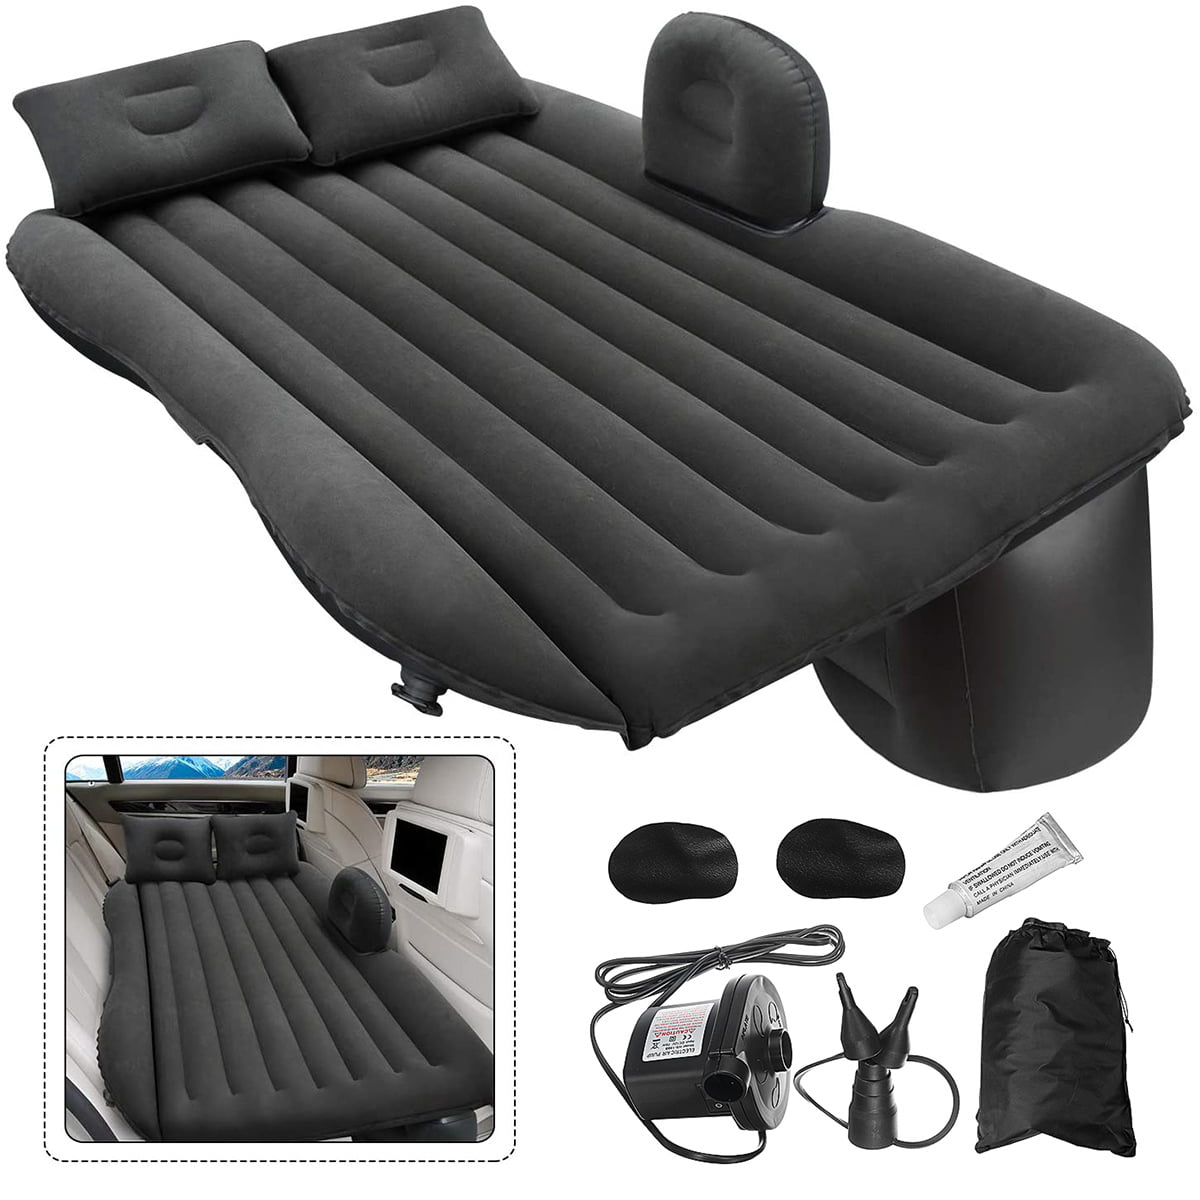 Inflatable Travel Camping Car Seat Sleep Rest Mattress Air Bed W/ Pillows-Black 